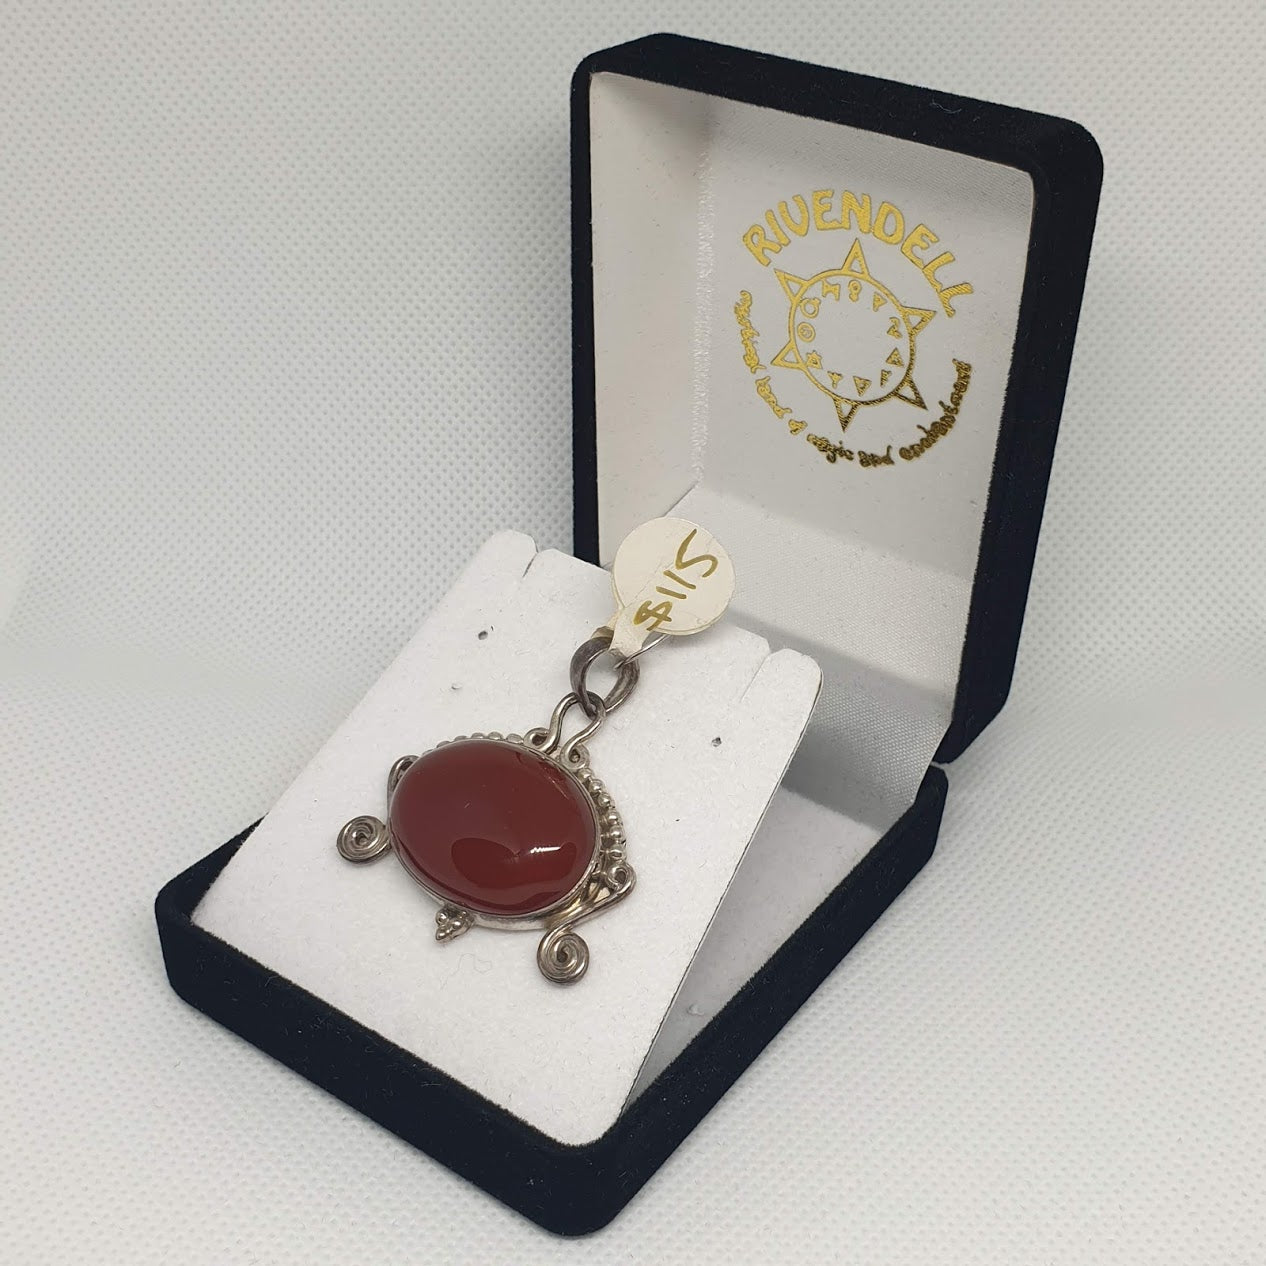 Carnelian 925 Sterling Silver Pendant with Setting Detail - Rivendell Shop